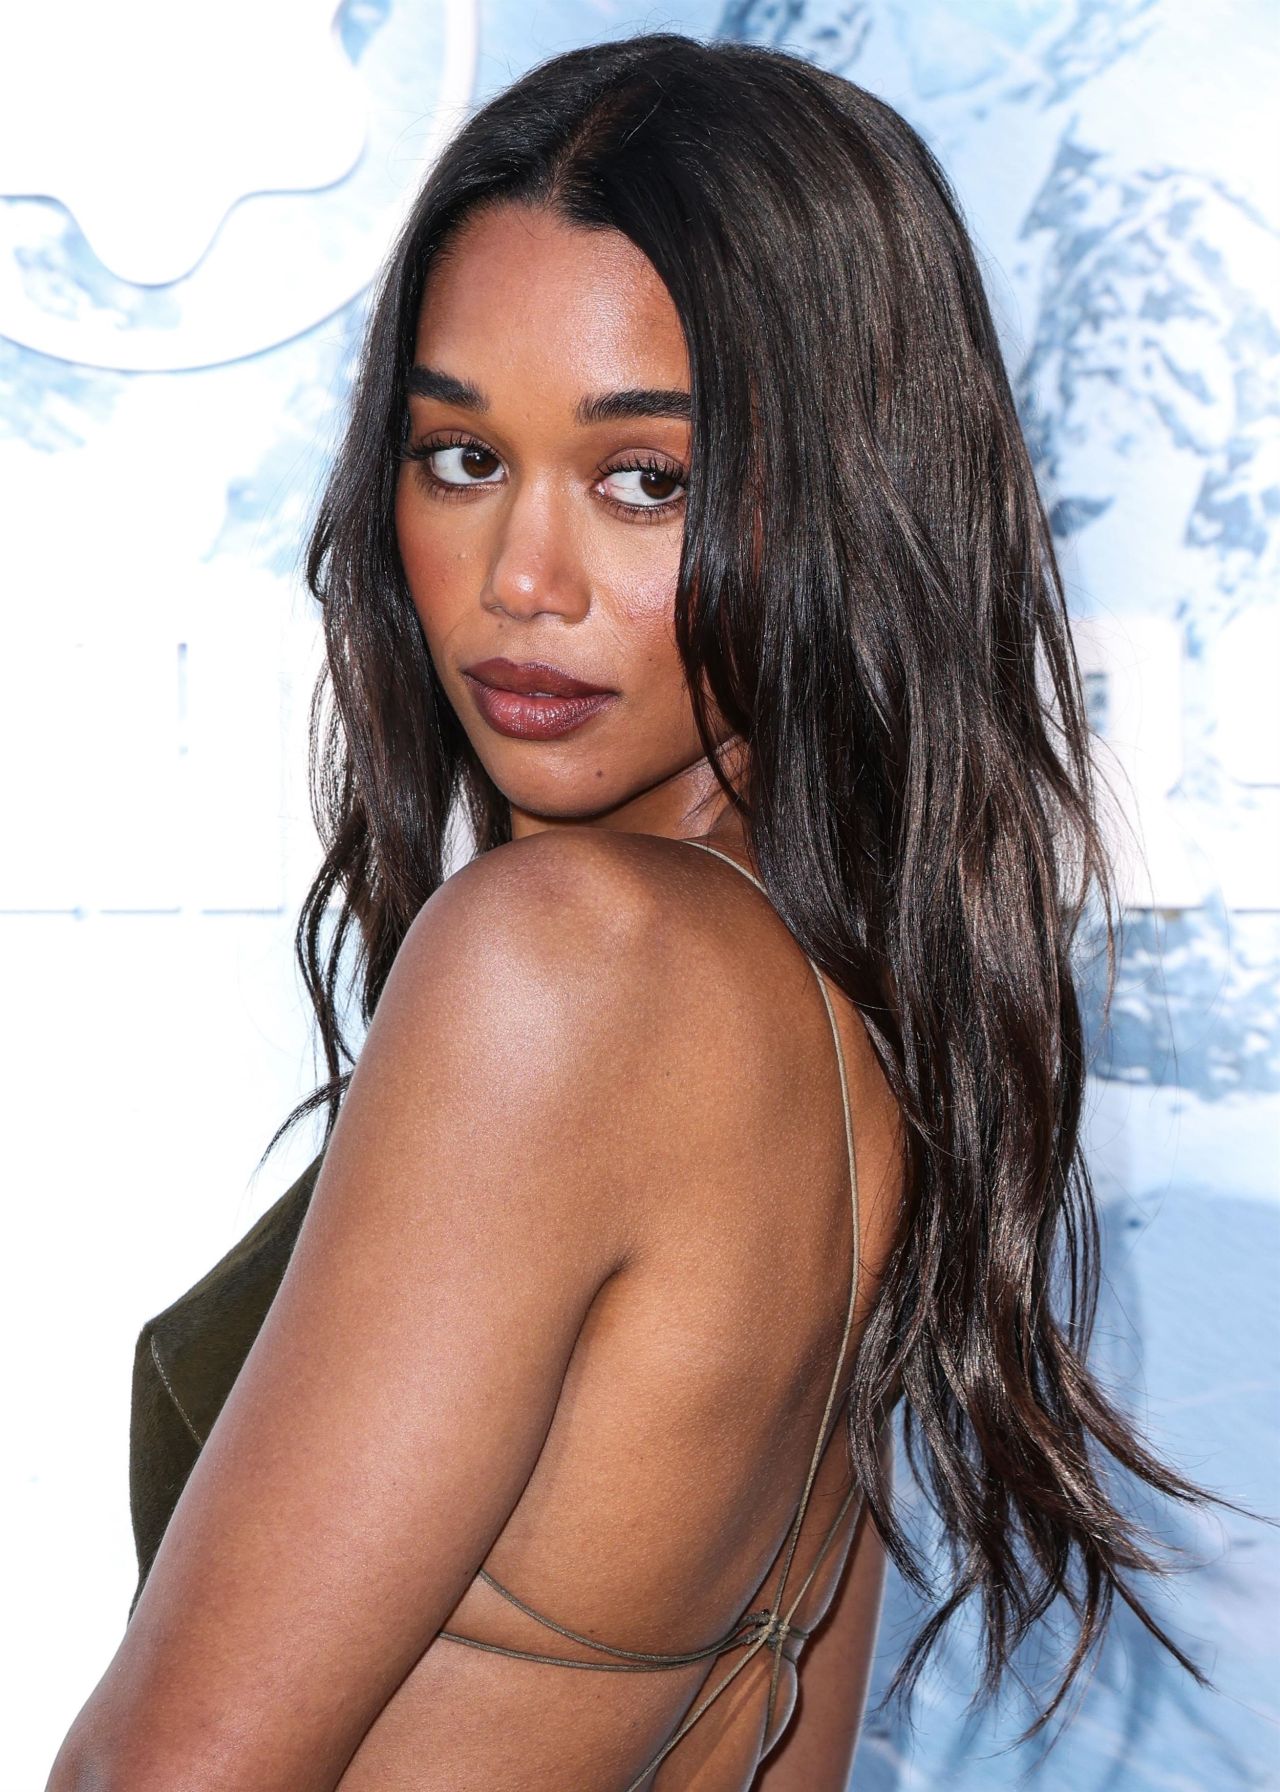 LAURA HARRIER AT MONTBLANC EVENT CELEBRATING THE 100 YEAR OF THE MEISERSTUCK PEN10